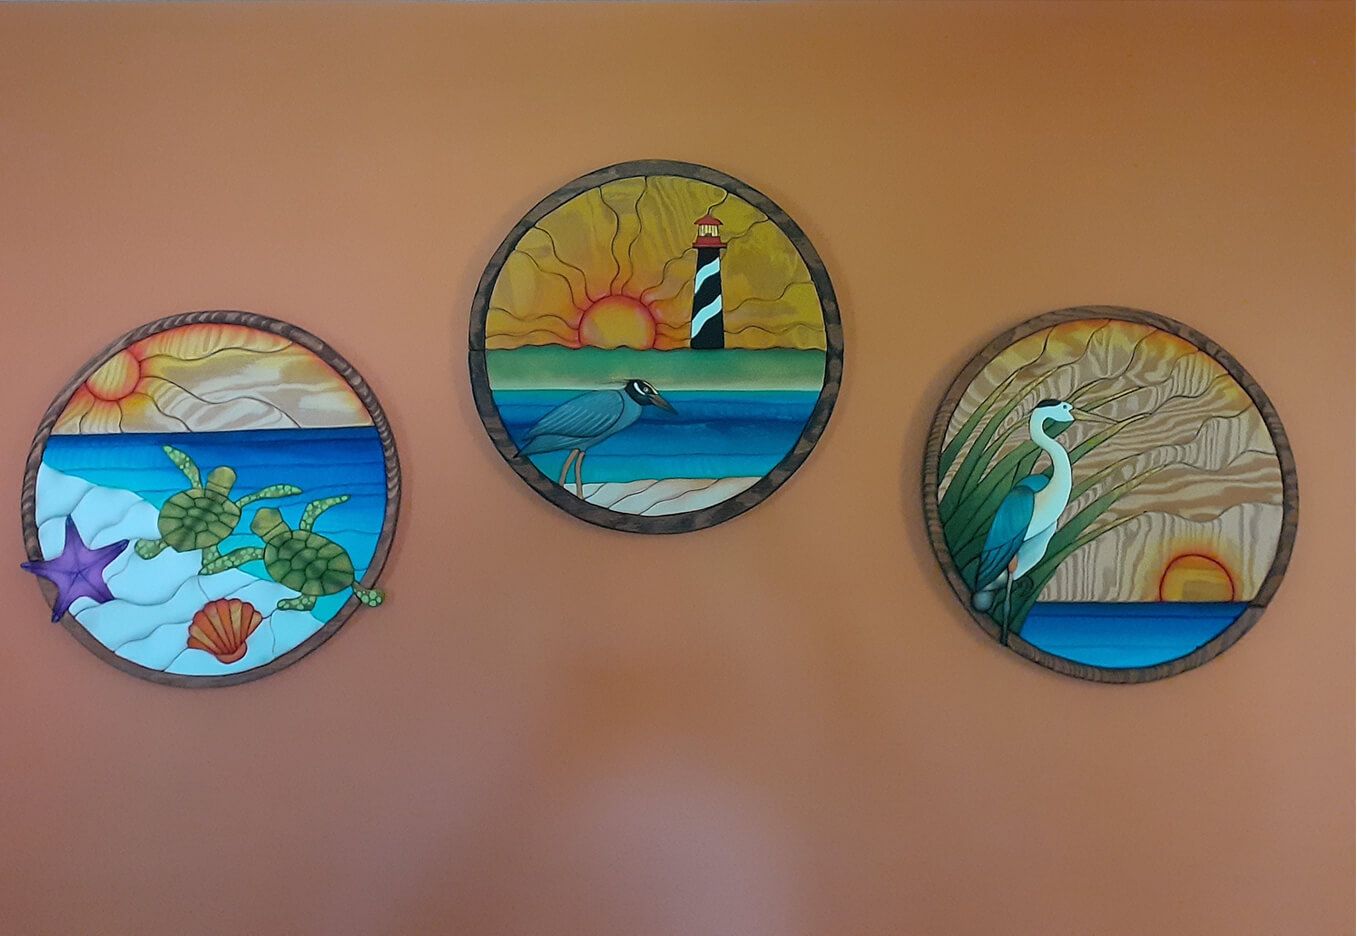 Intarsia art by Nick Vidakovic featuring scuba diver in reef, island sunset, and shells on the beach